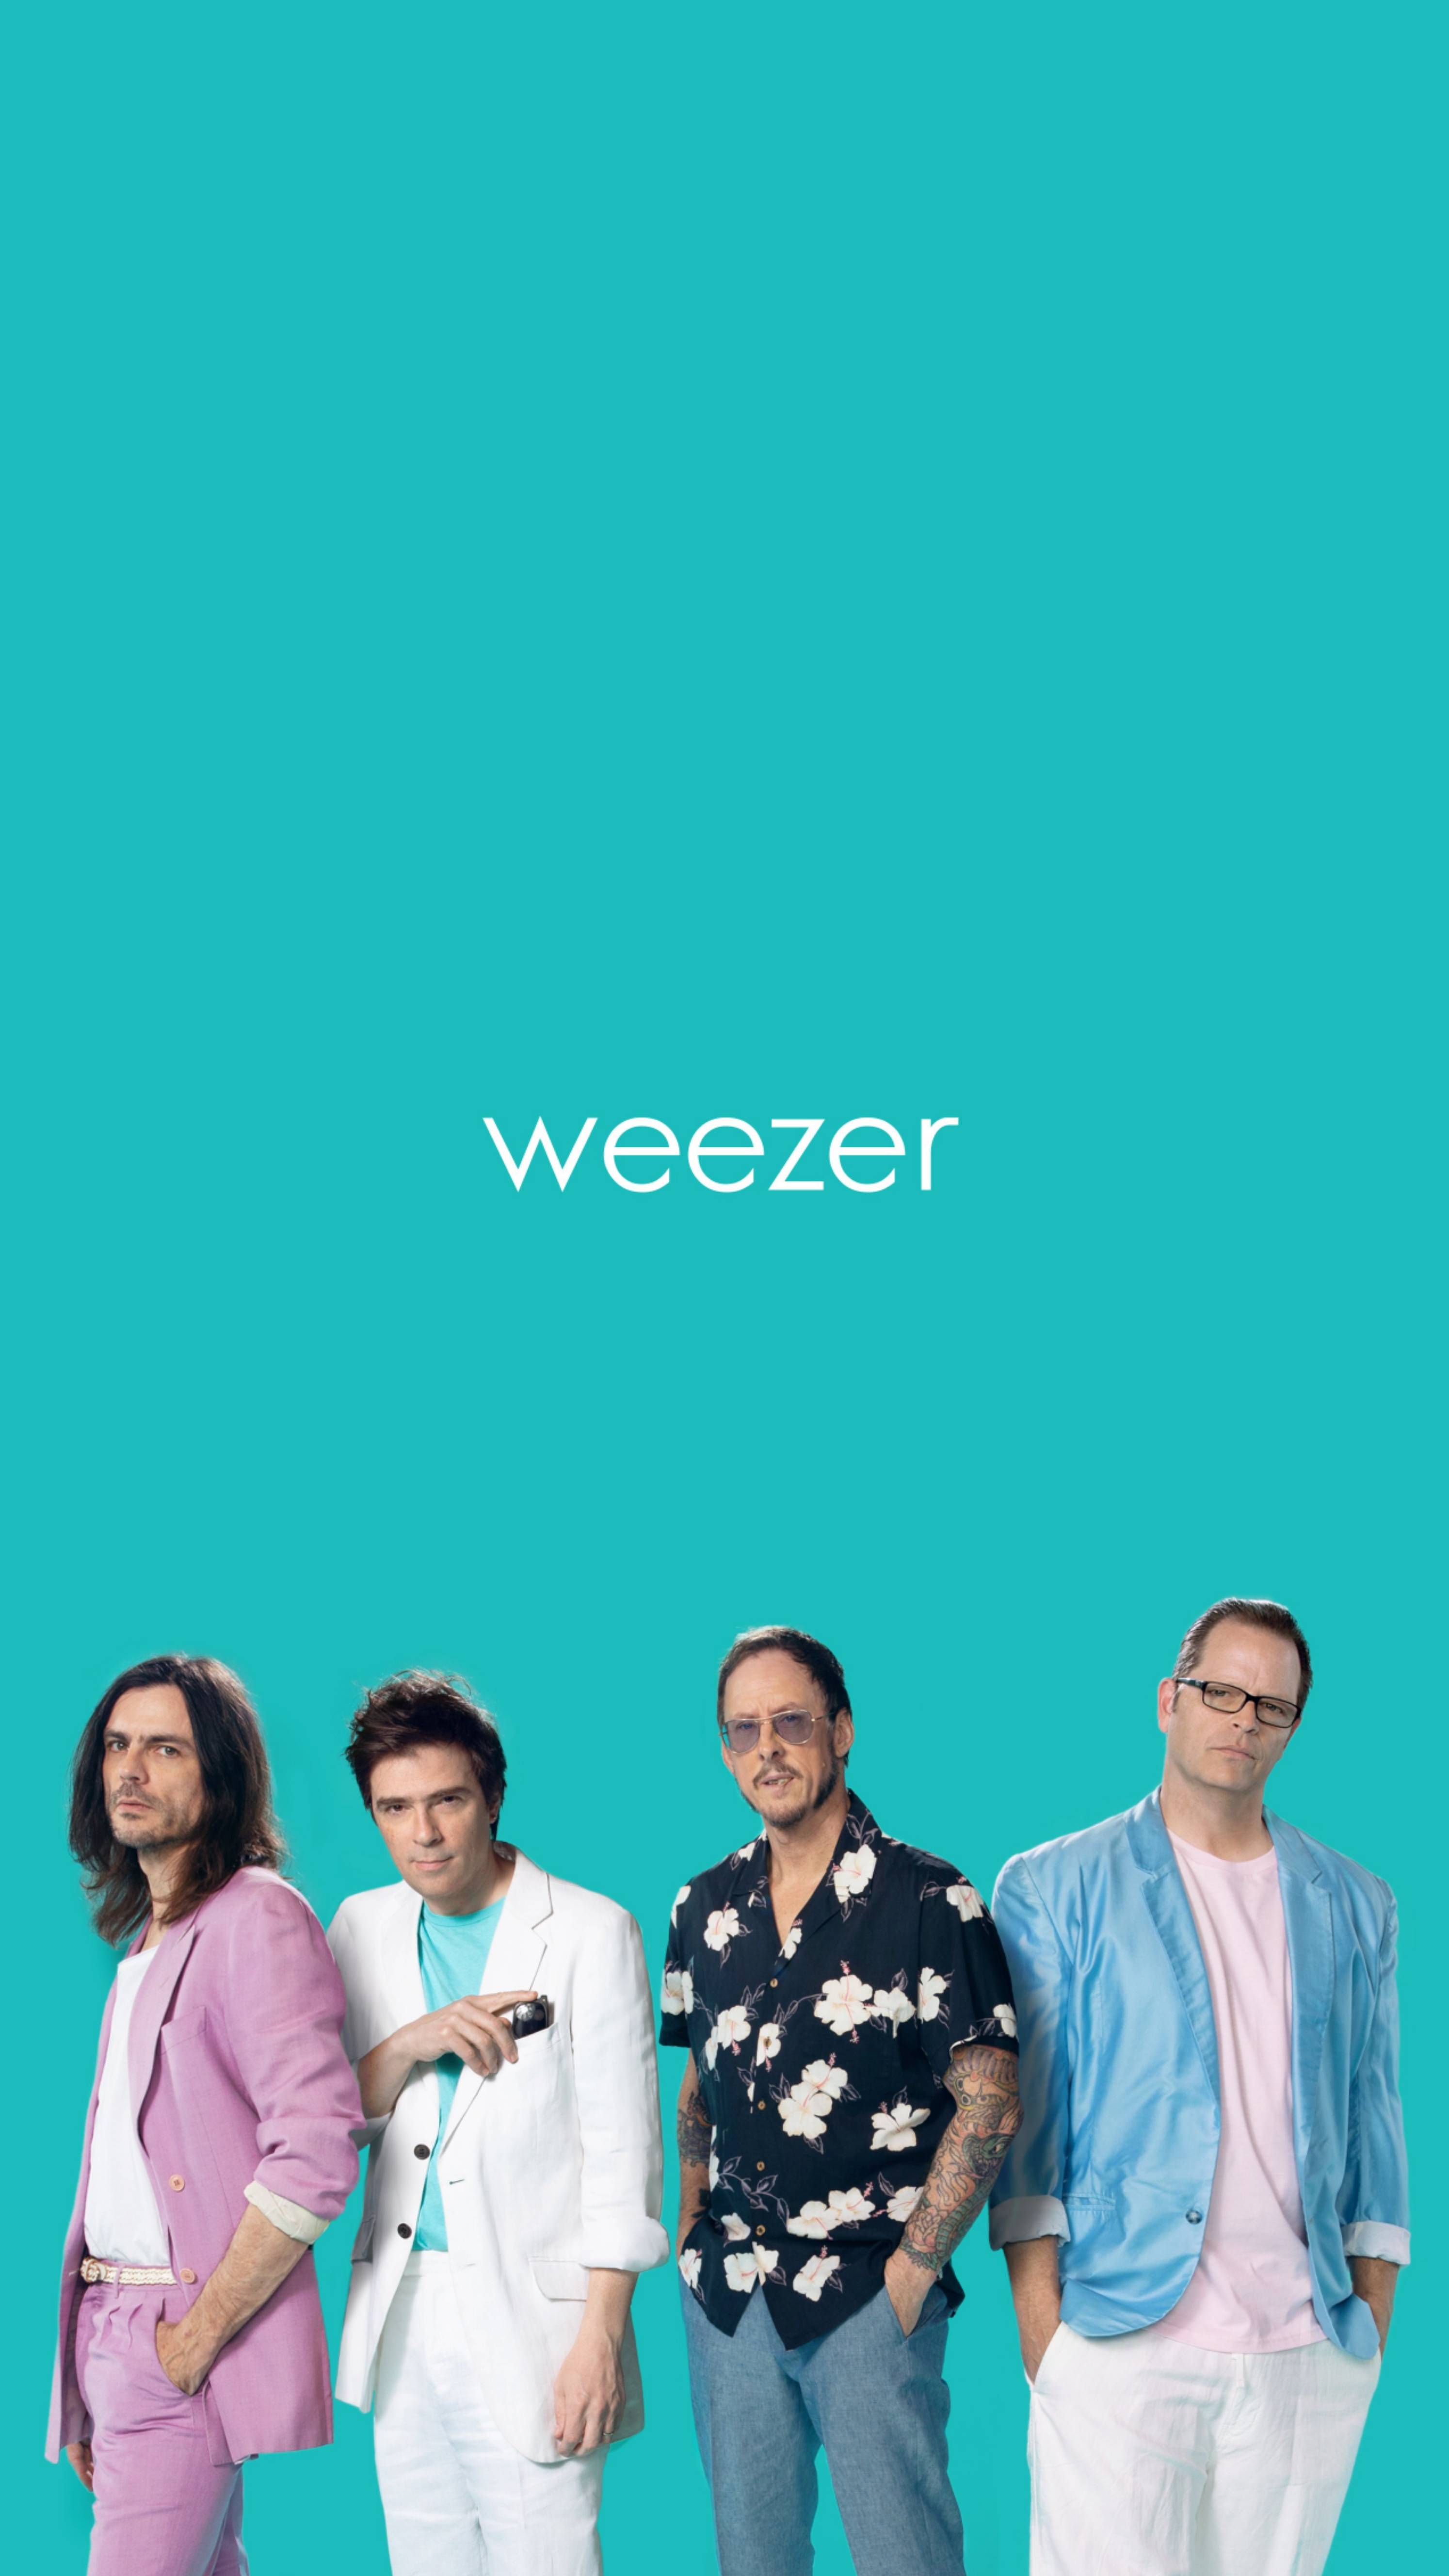 Here S A Teal Album Wallpaper